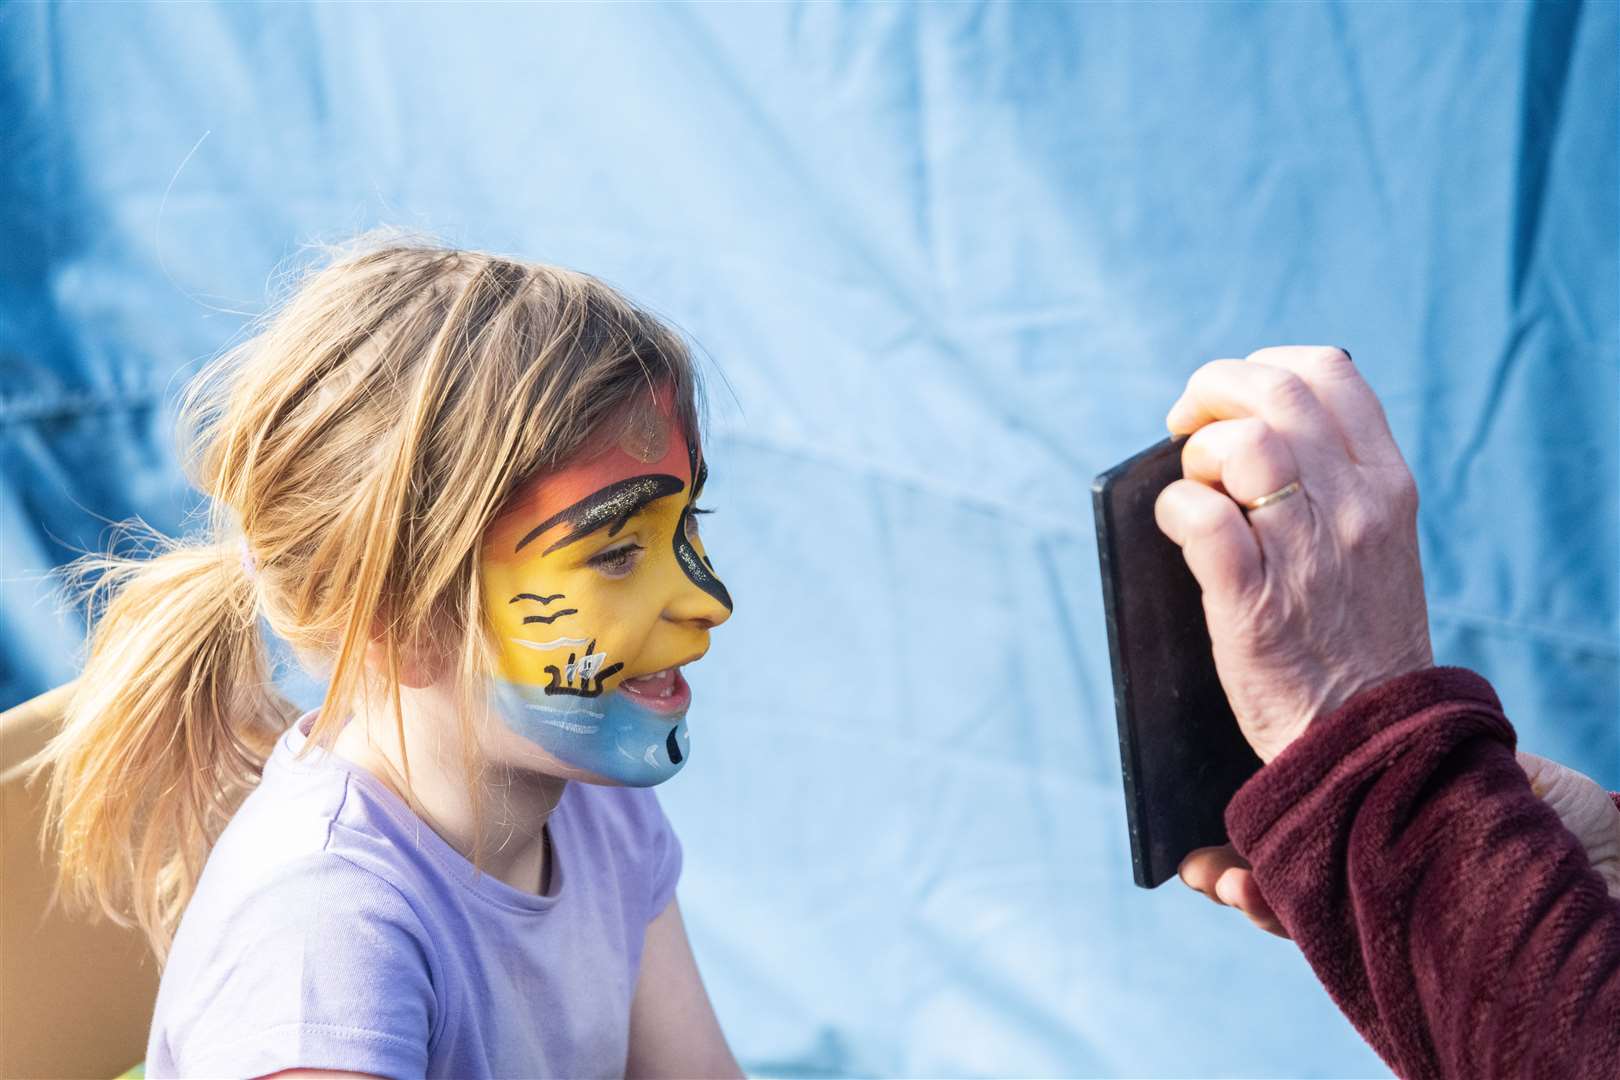 Mia McRobbie delighted with Bubbles and Co’s face painting stall. Picture: Beth Taylor